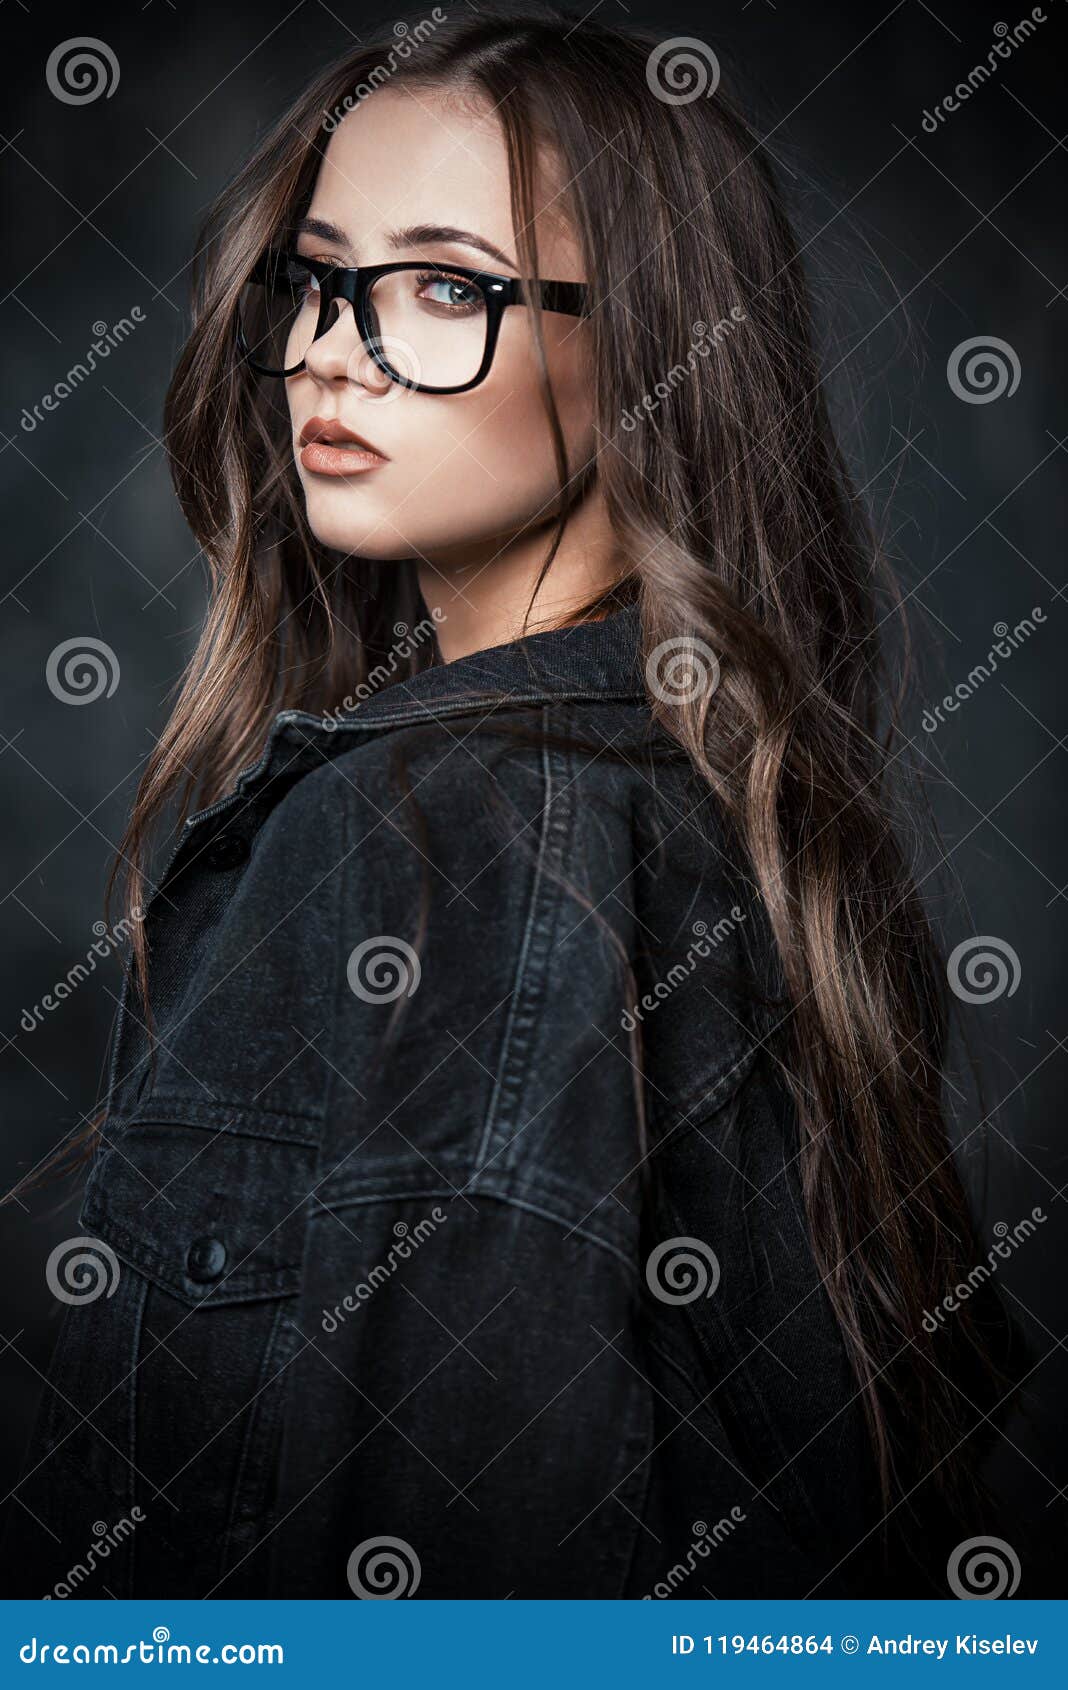 Attractive Girl in Spectacles Stock Photo - Image of long, brown ...